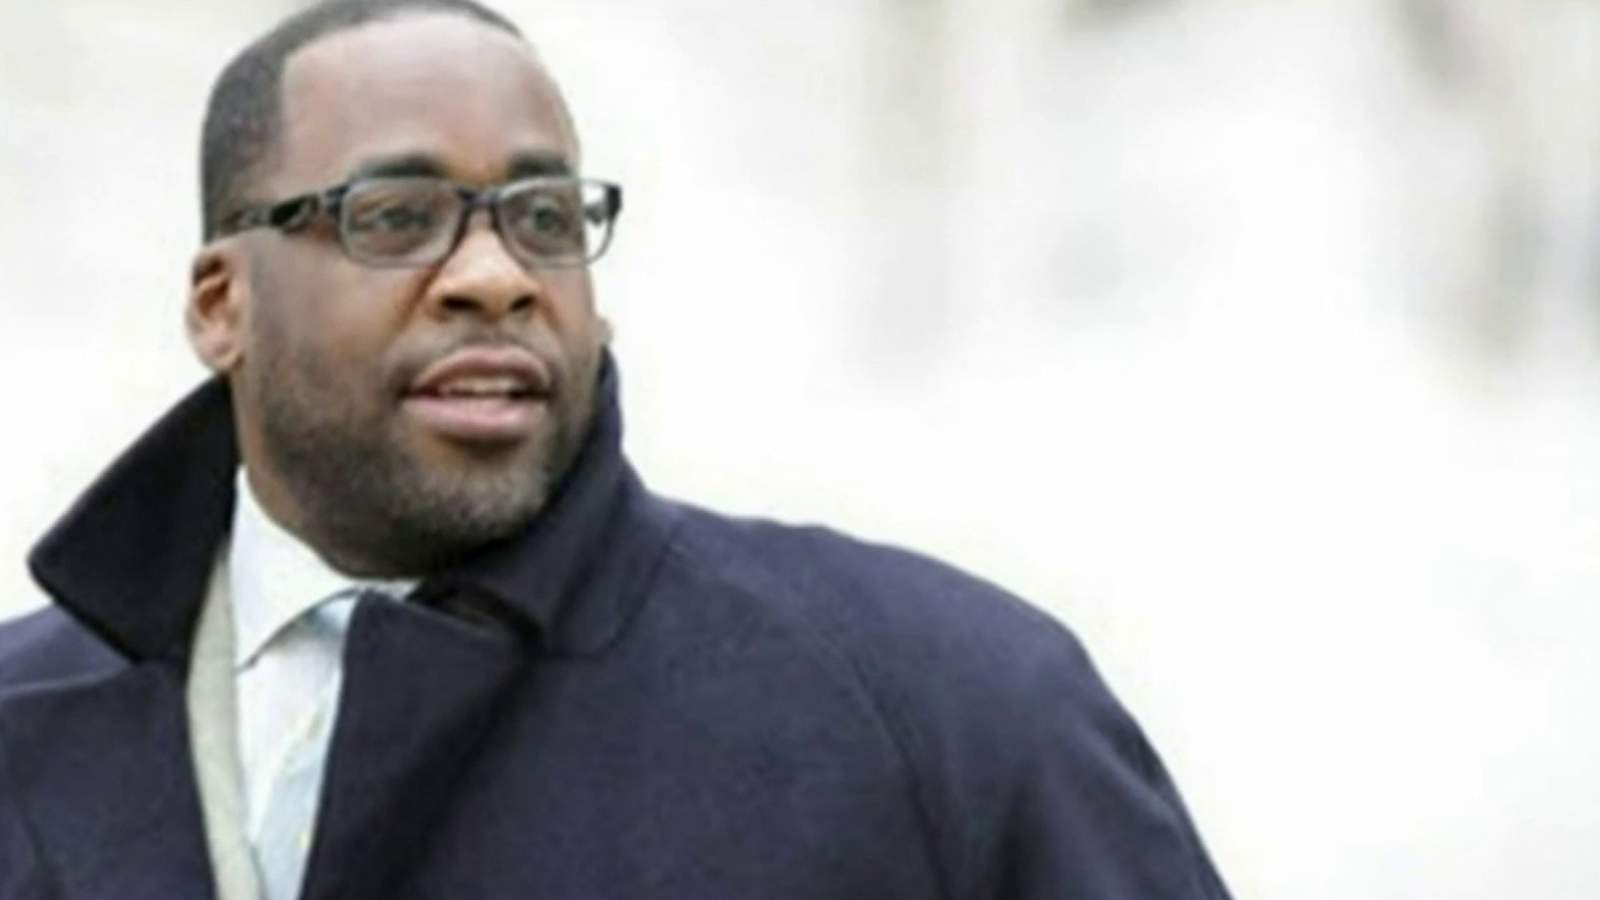 Morning Briefing Jan. 21, 2021: Kwame Kilpatrick reunites with family, why today is most intriguing day for Detroit weather records, more